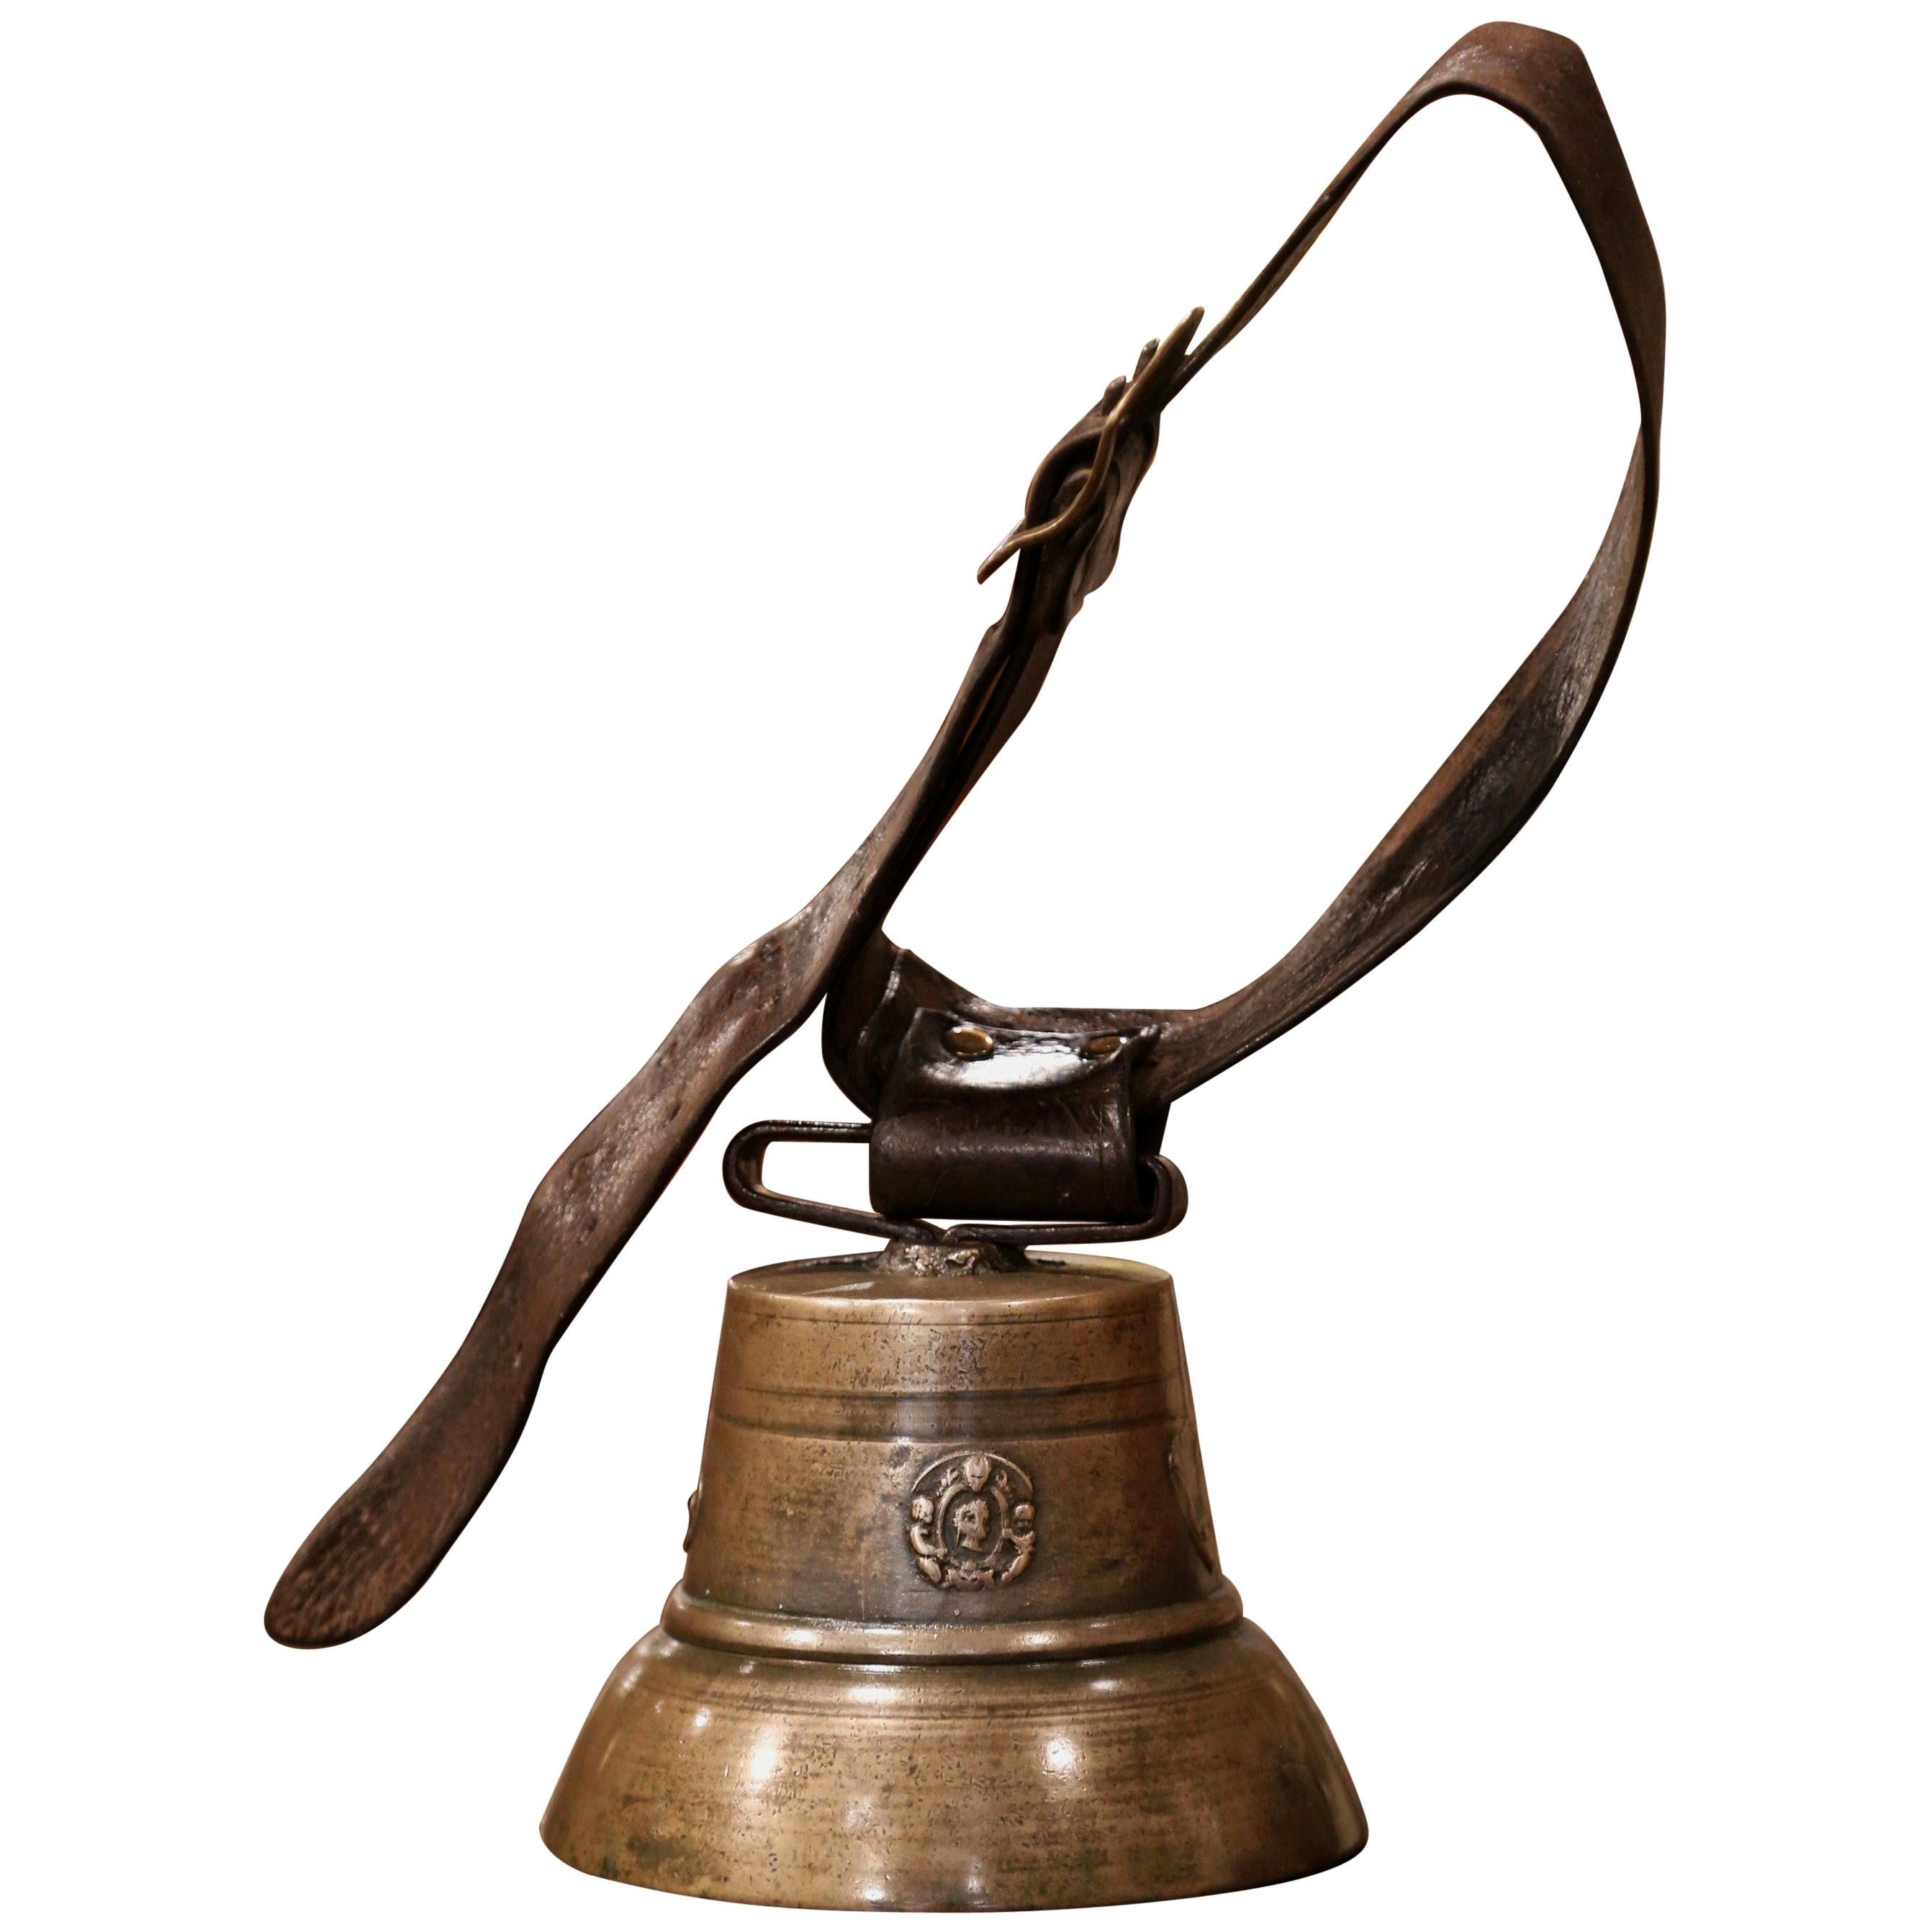 19th Century French Bronze Cow Bell with Original Leather Strap and Buckle